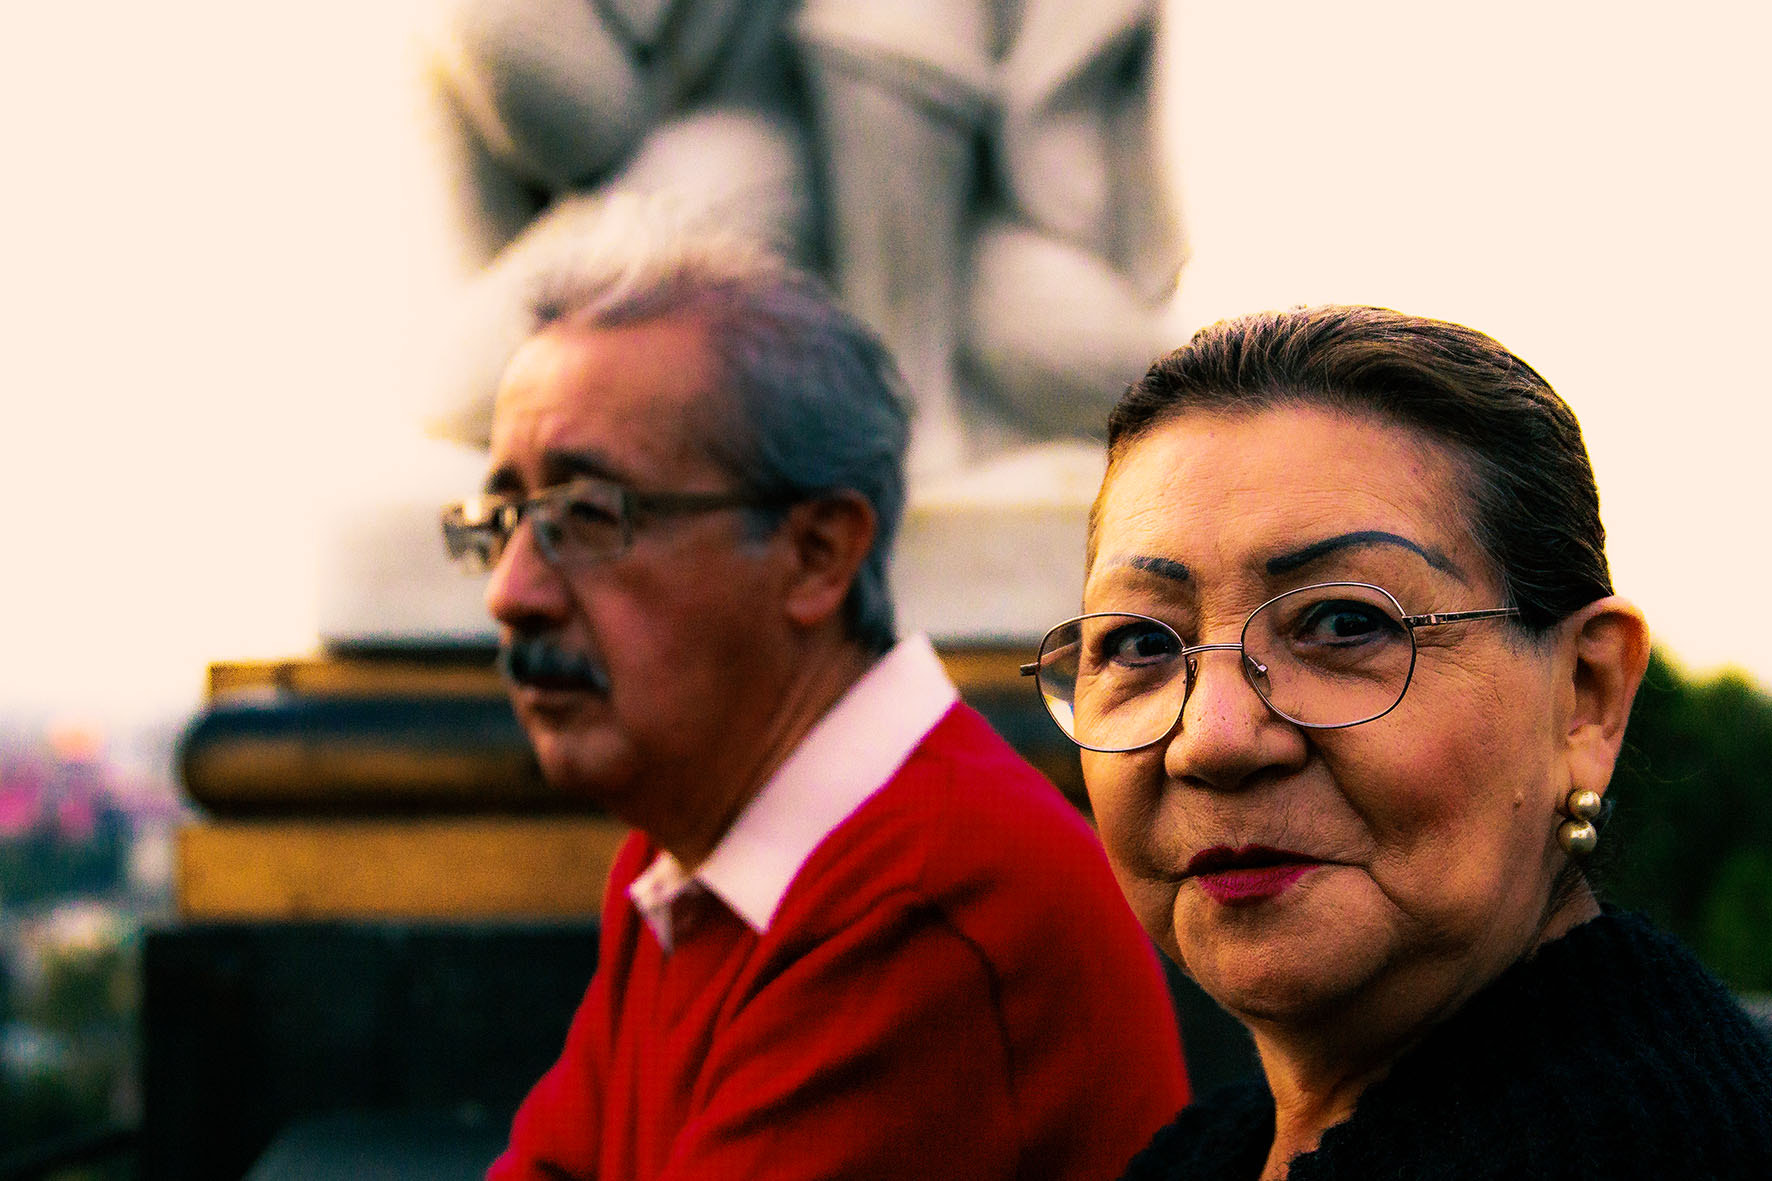 Canon EOS 60D + Sigma 24-105mm f/4 DG OS HSM | A sample photo. Pedro y lupita by me photography